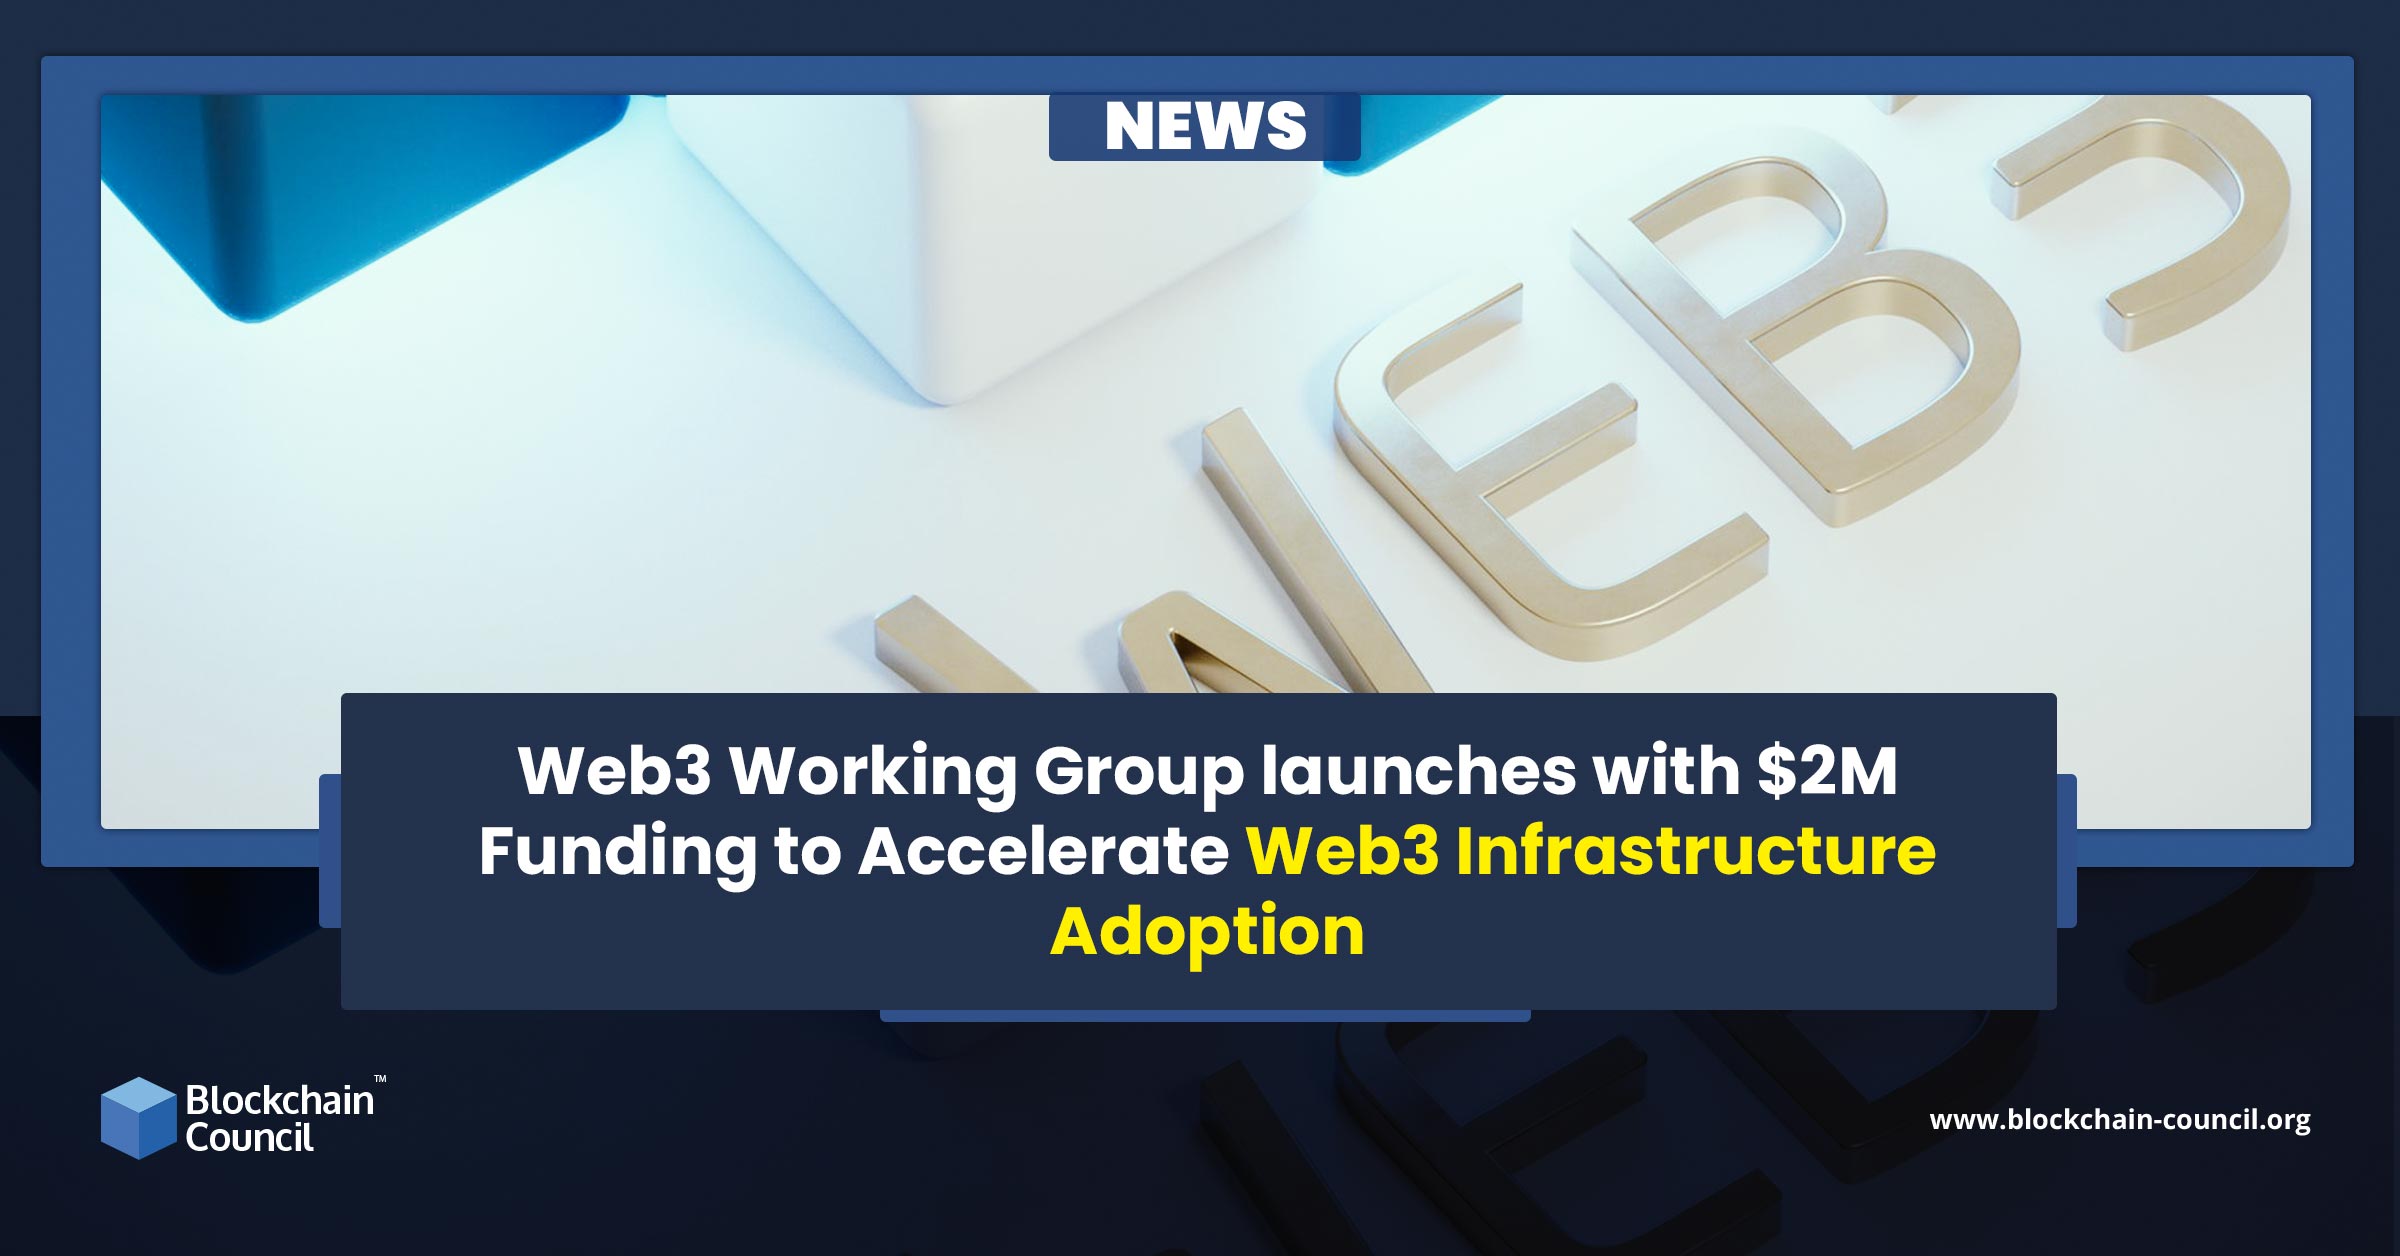 Web3 Working Group launches with $2M Funding to Accelerate Web3 Infrastructure Adoption